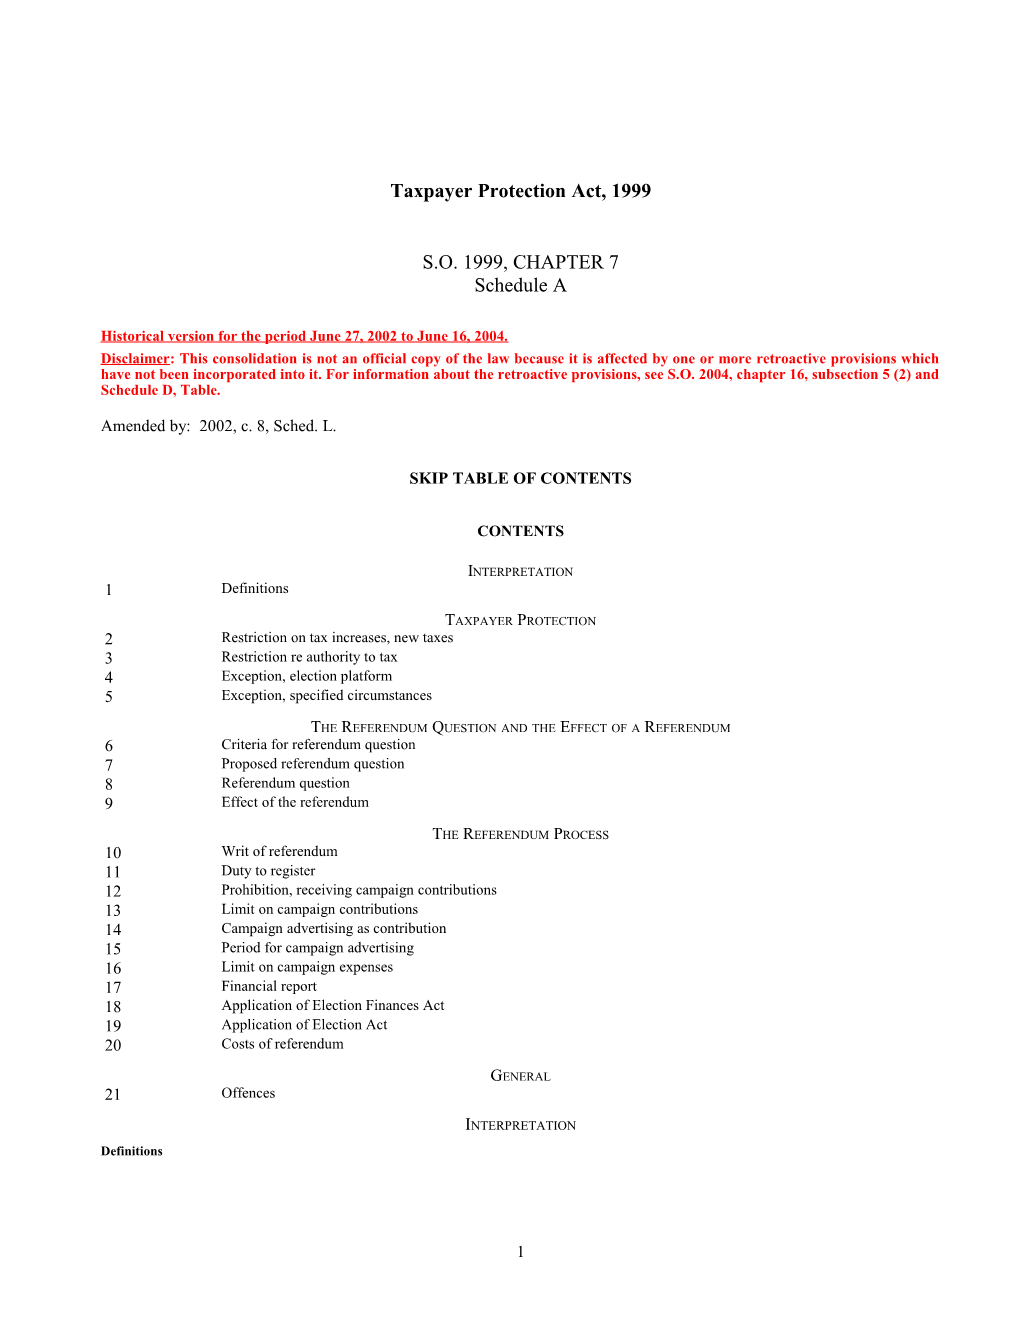 Taxpayer Protection Act, 1999, S.O. 1999, C. 7, Sched. A